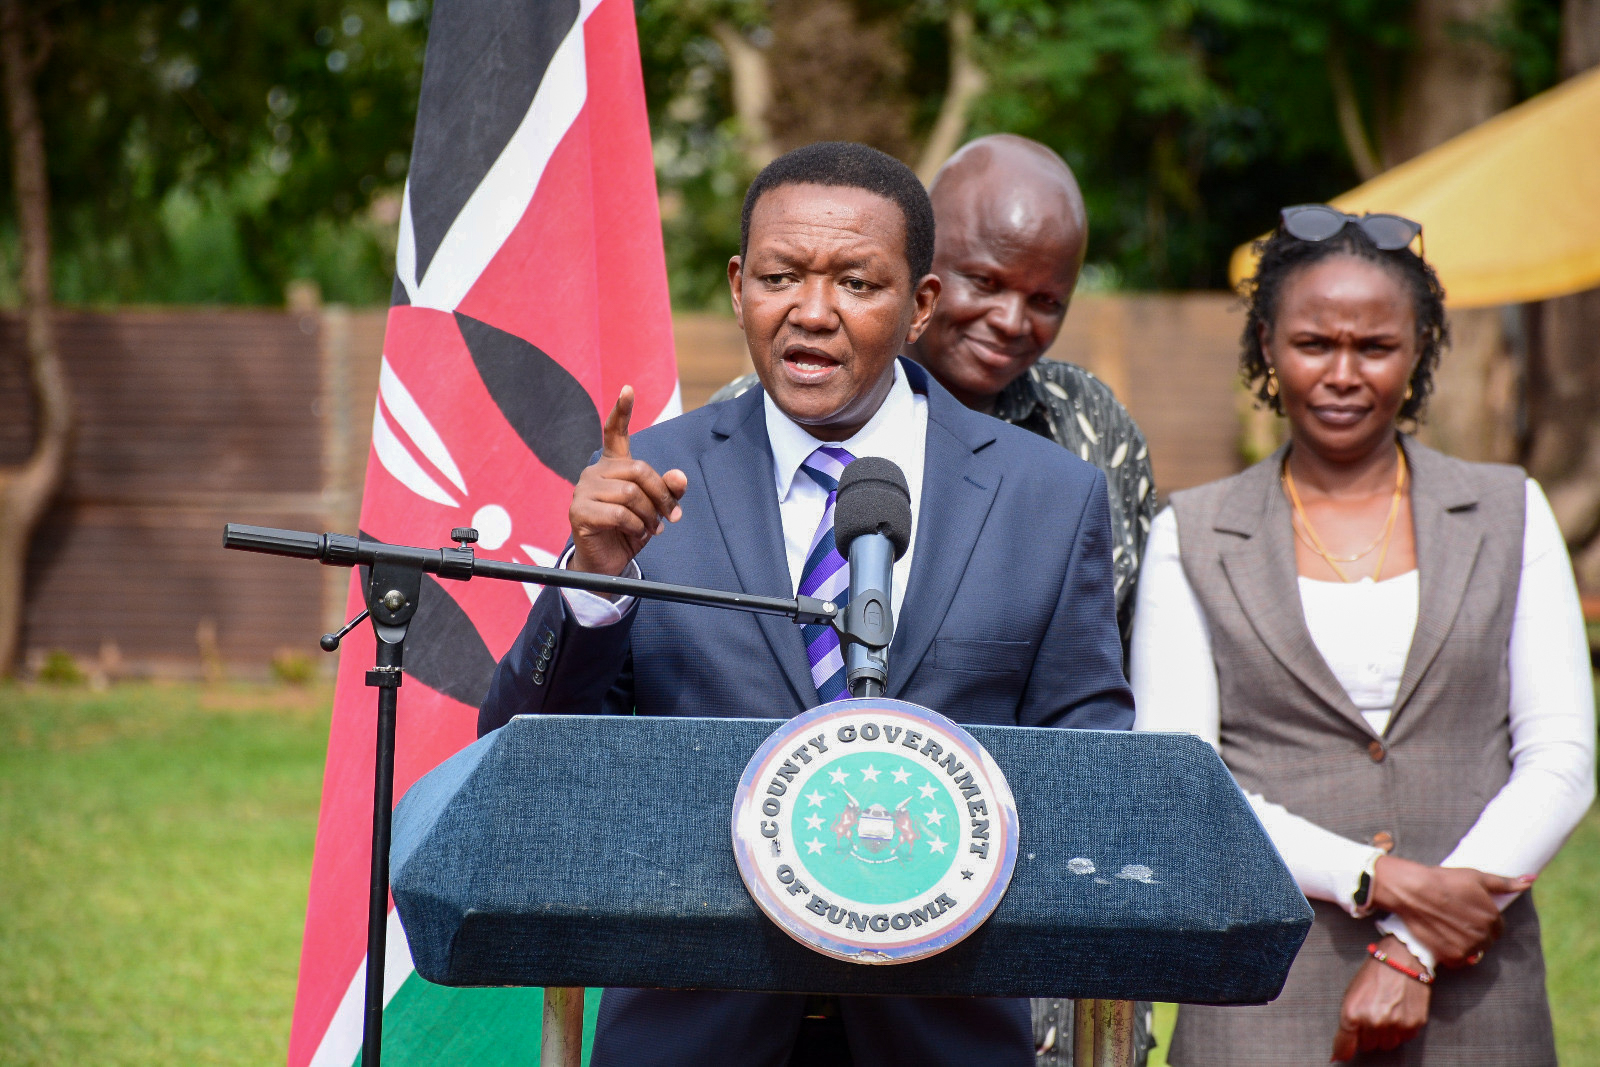 The Cabinet Secretary, Ministry of Tourism and Wildlife, Dr. Alfred Mutua, addressing the press.